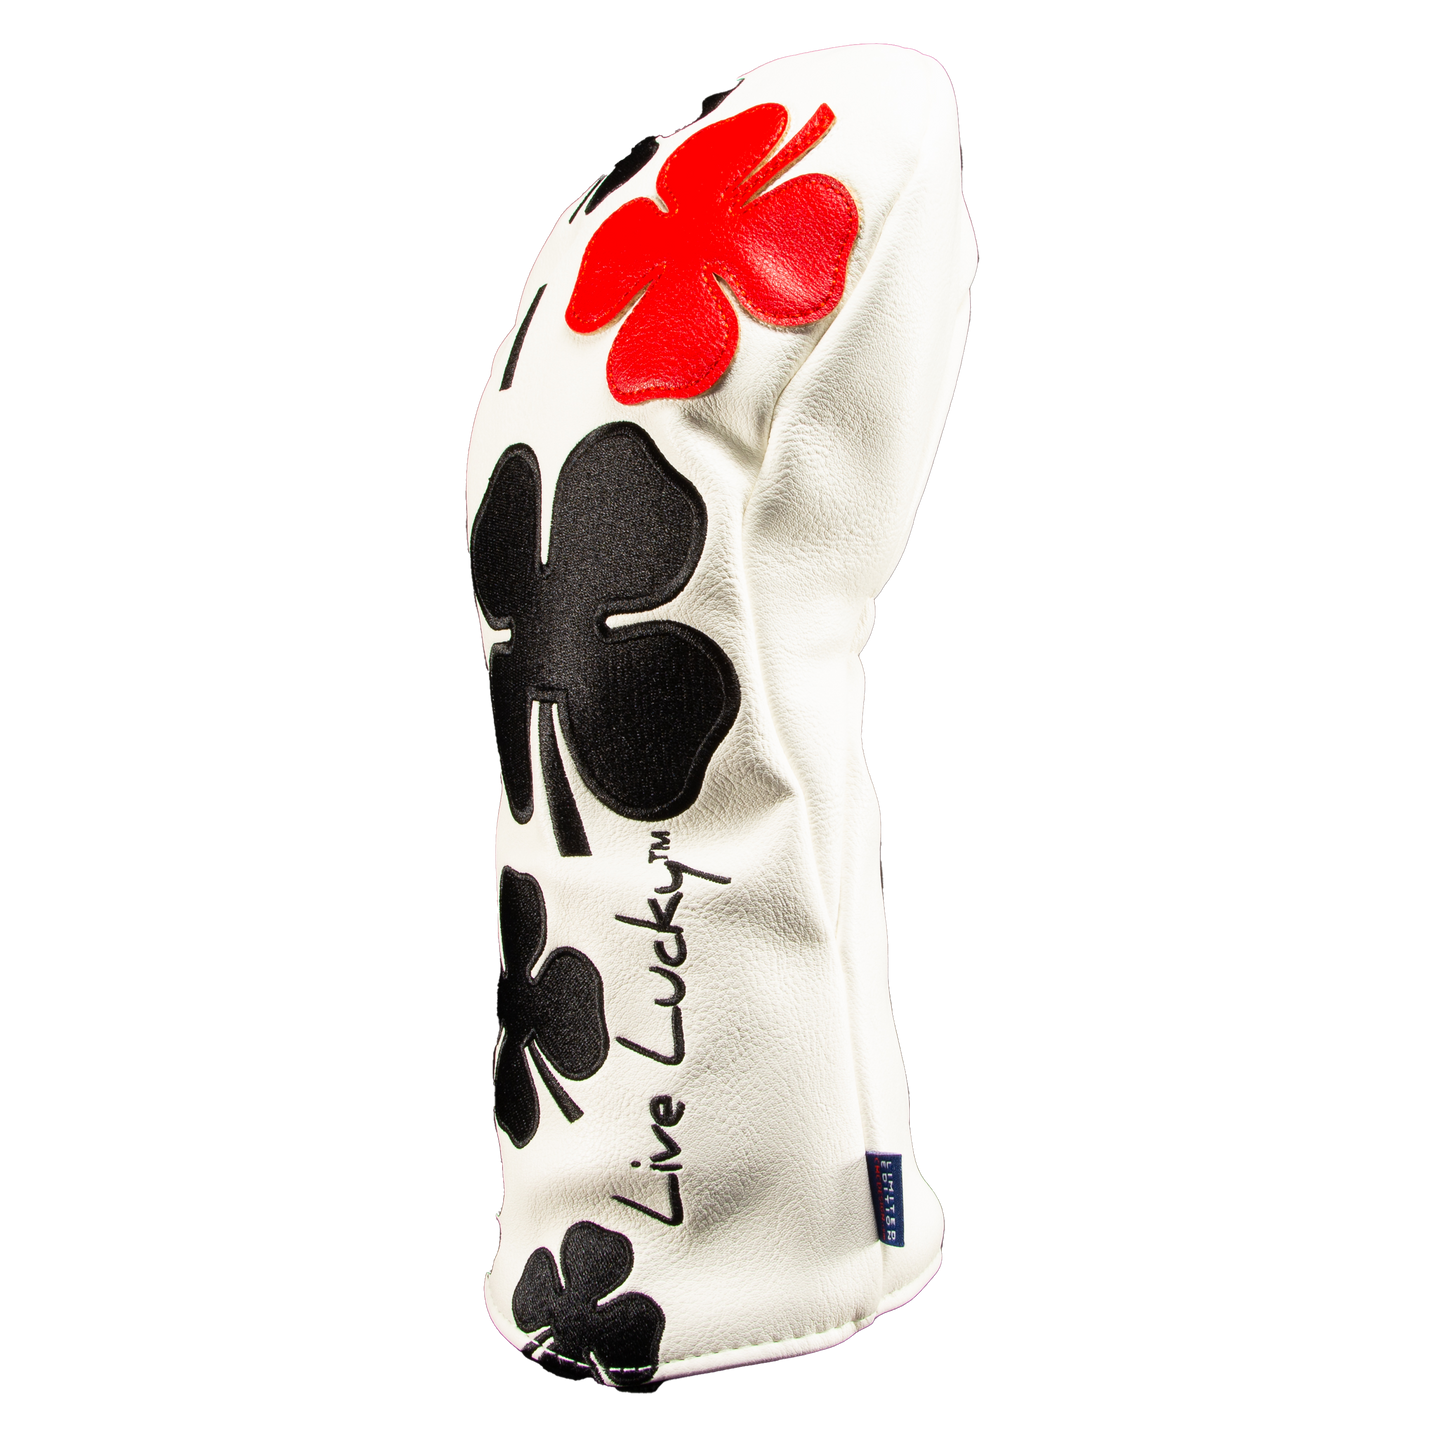 Live Lucky "Poker" Driver Cover